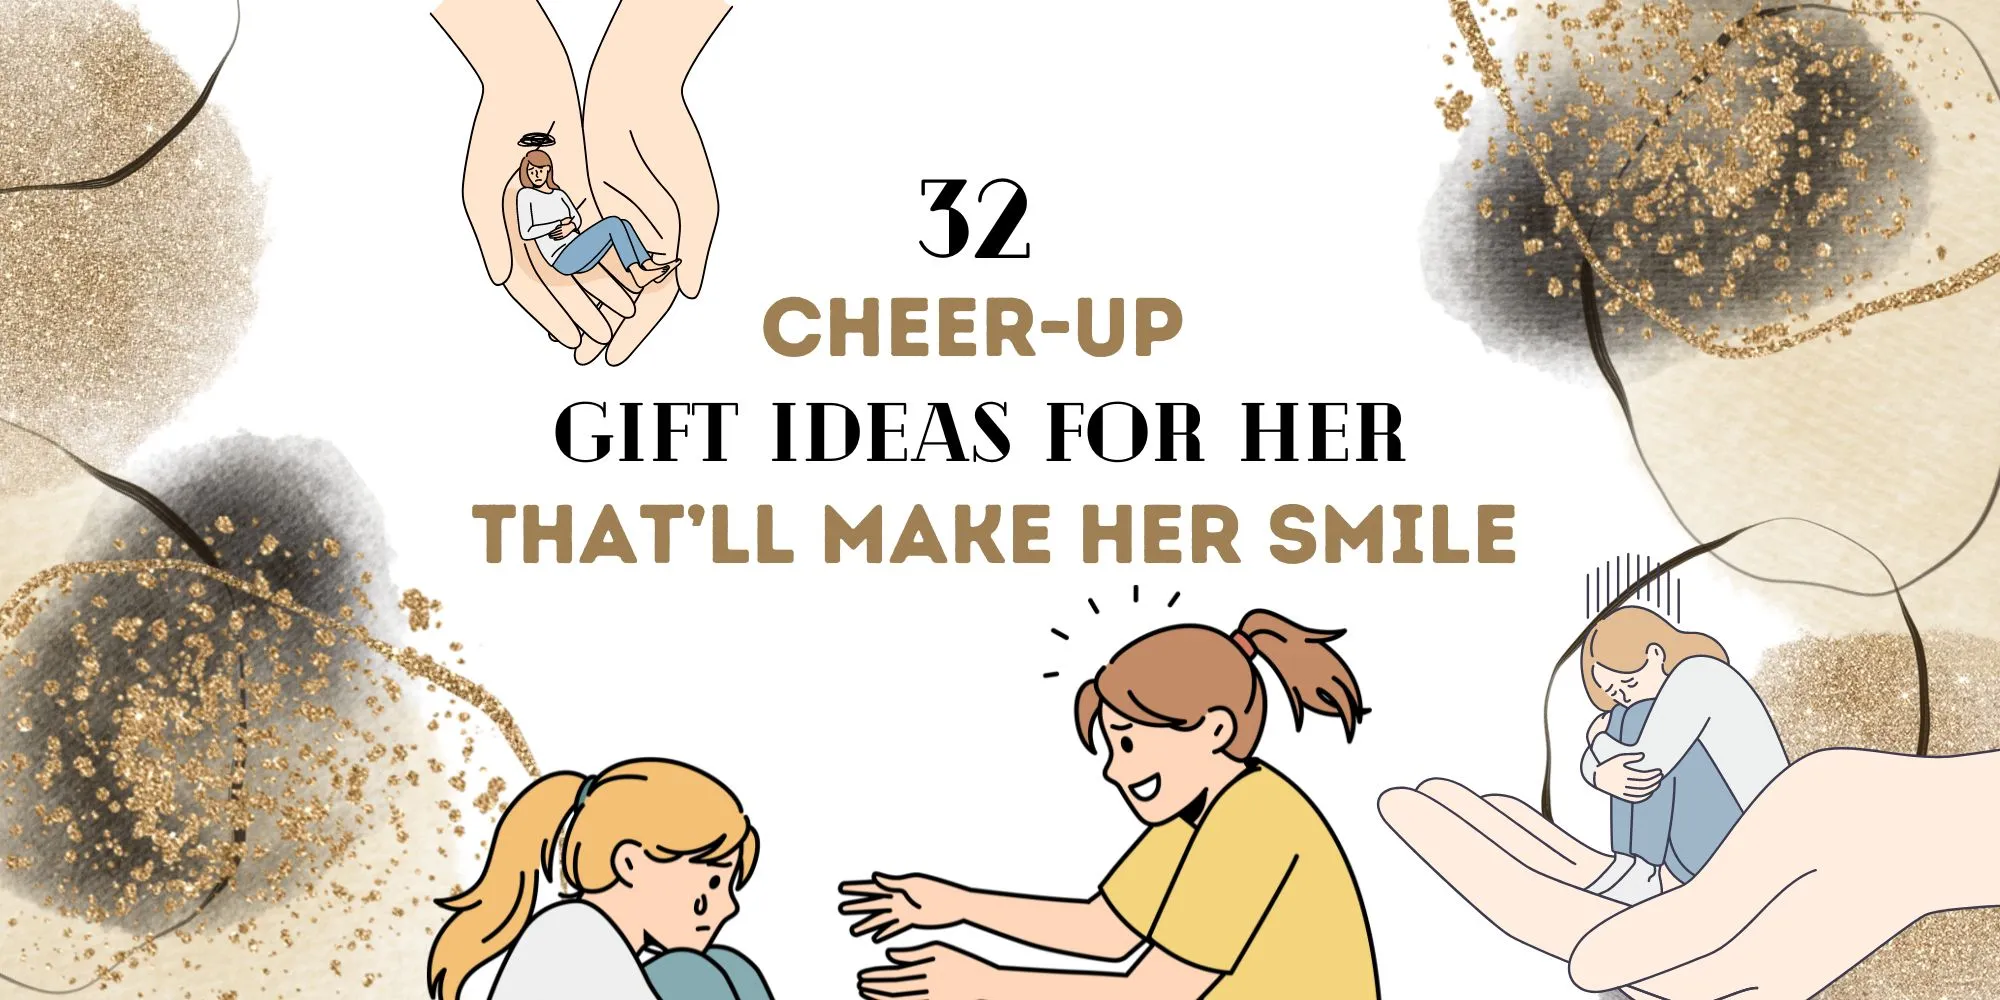 Cheer-Up Gift Ideas For Her